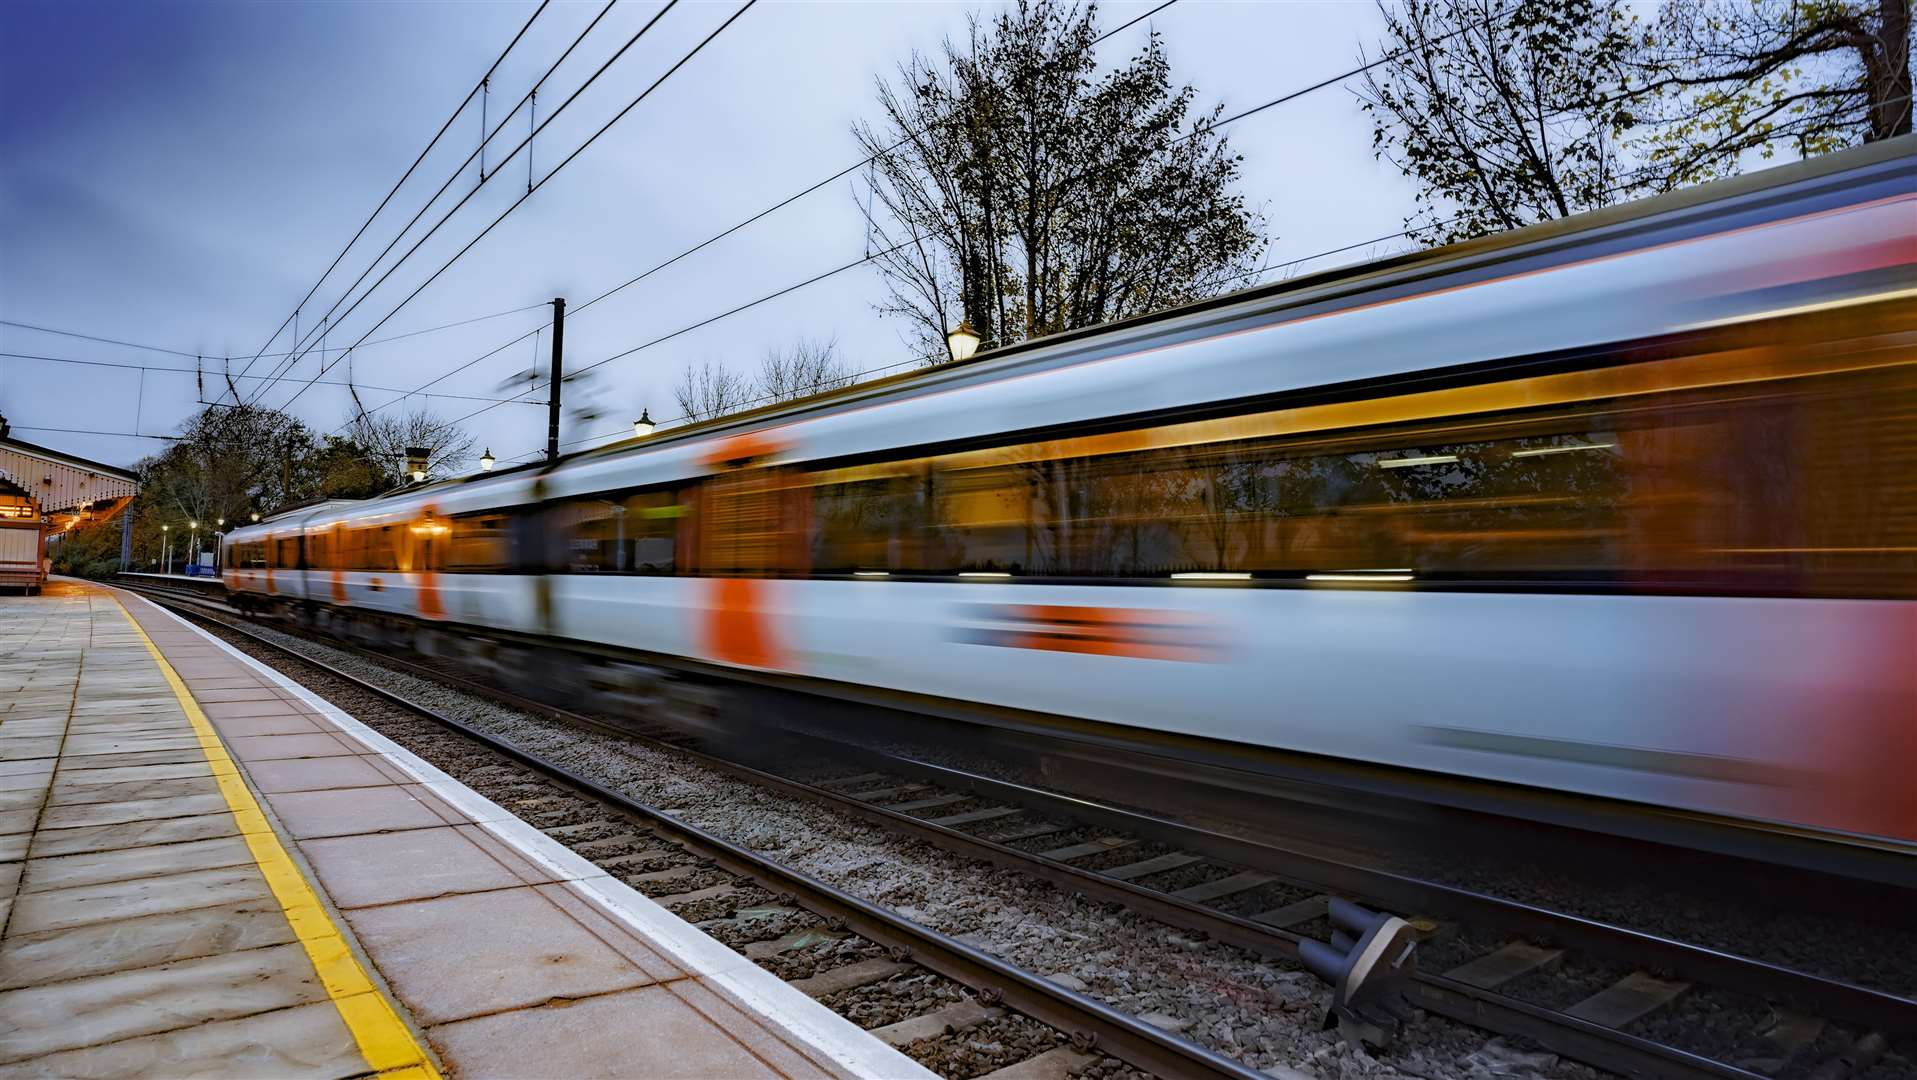 The RMT says the strike action will bring the network to a halt. Picture: iStock